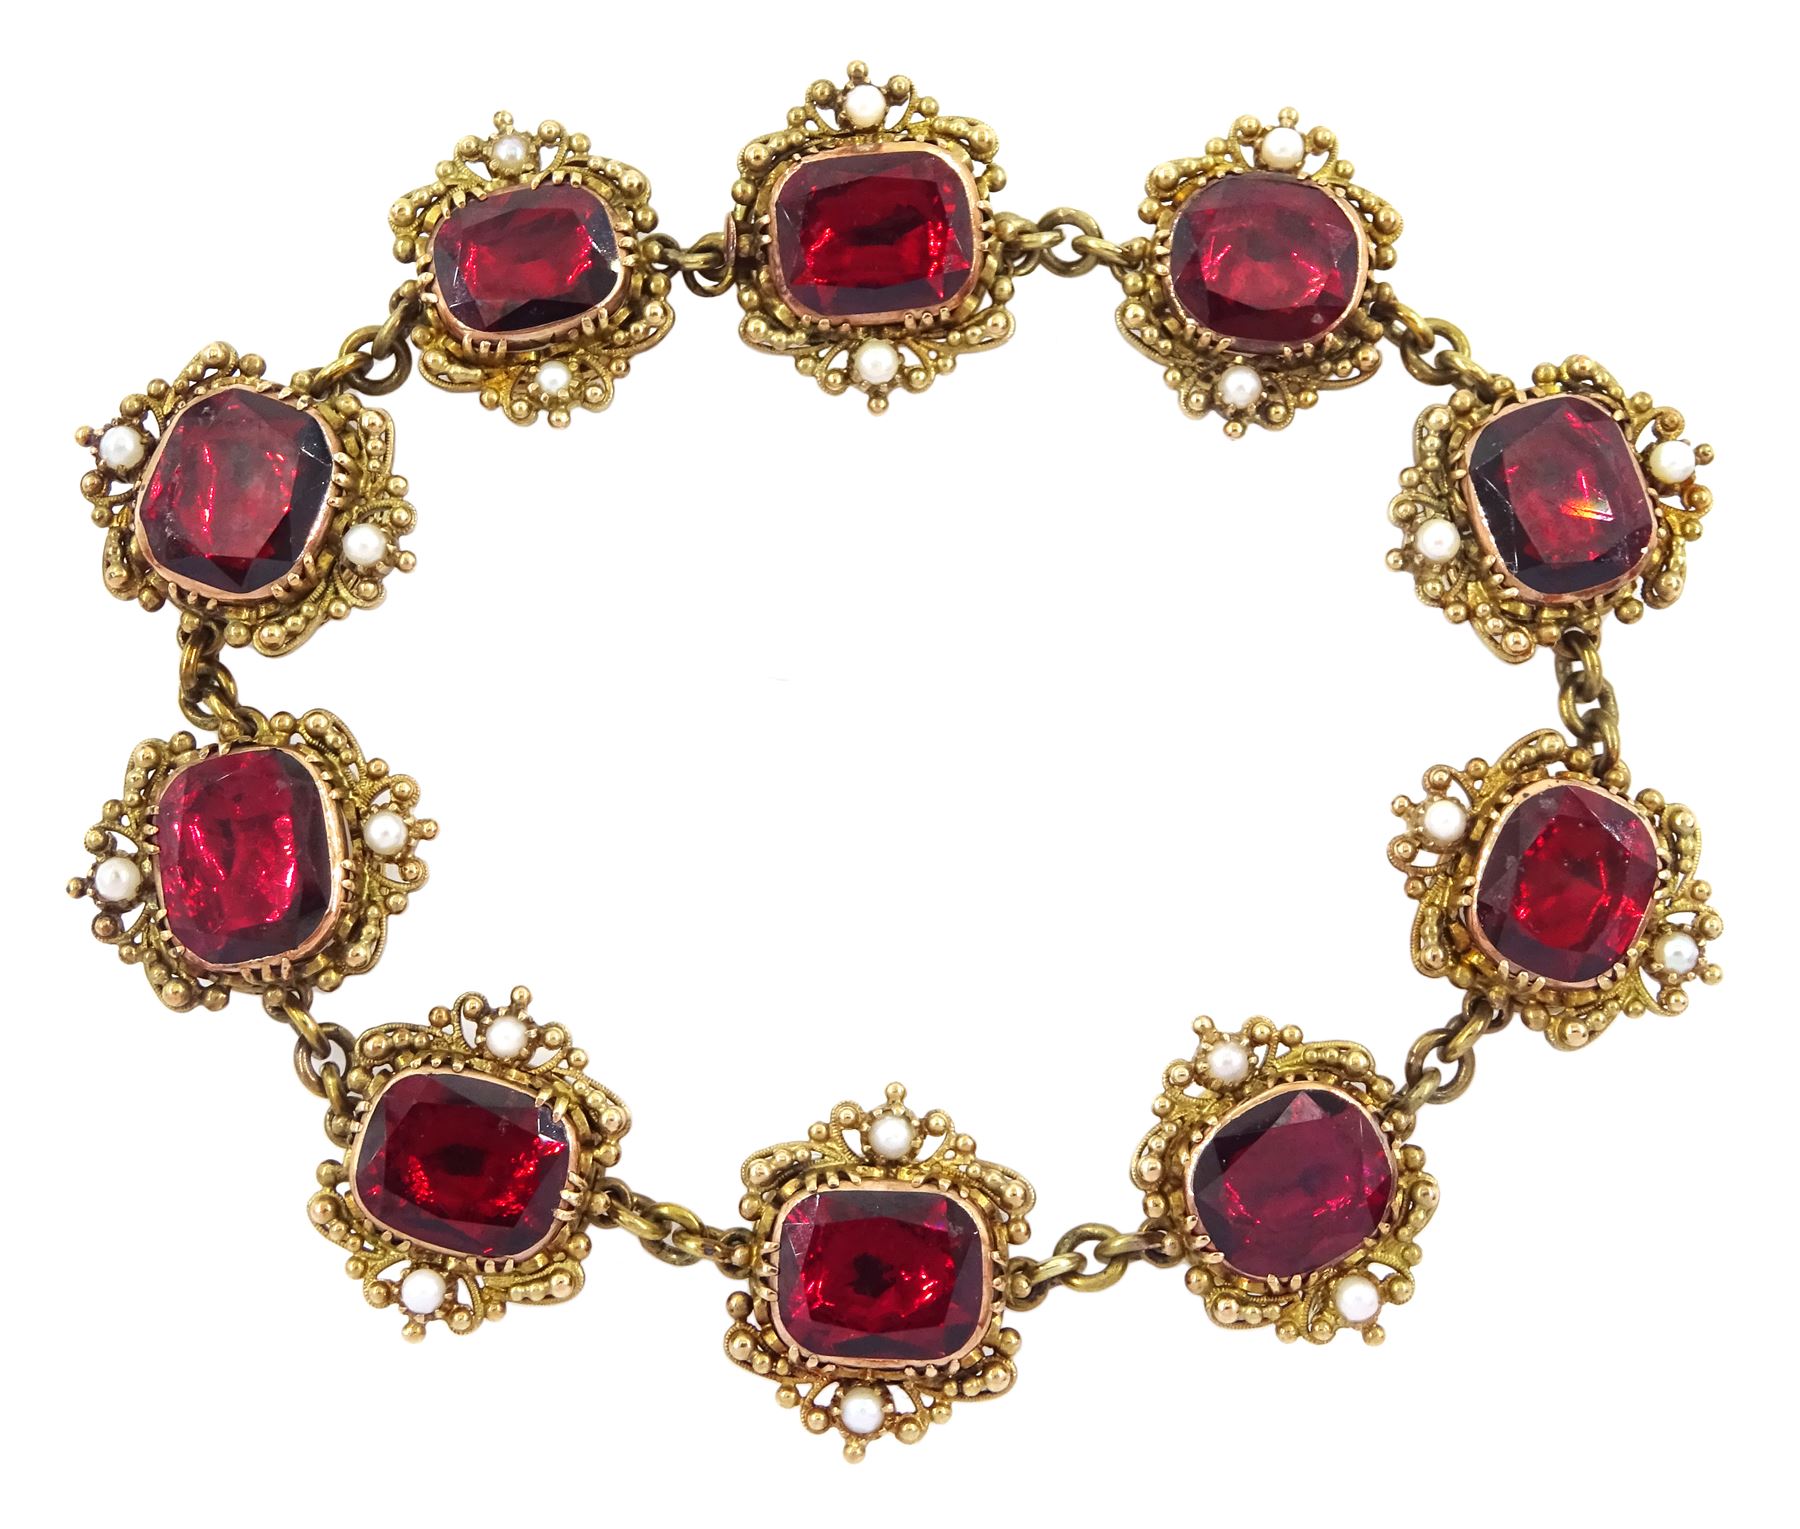 Early 20th century gold garnet and pearl bracelet